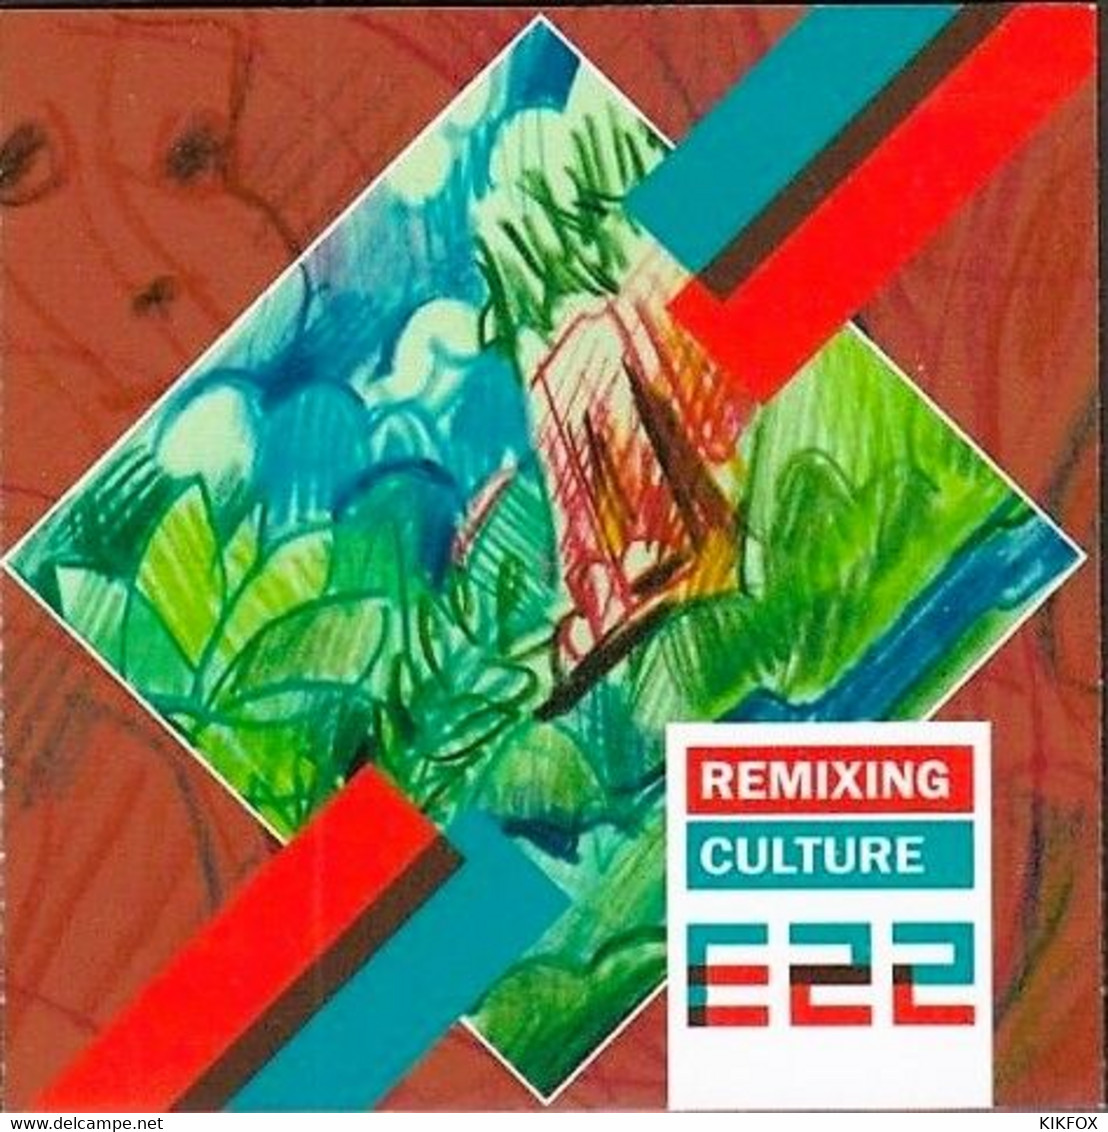 Luxembourg 2022  MH ,CARNET MI 2291 - 2295, Remixing Culture E22- Stamp Booklet L50g  , POSTFRISCH, NEUF - Carnets